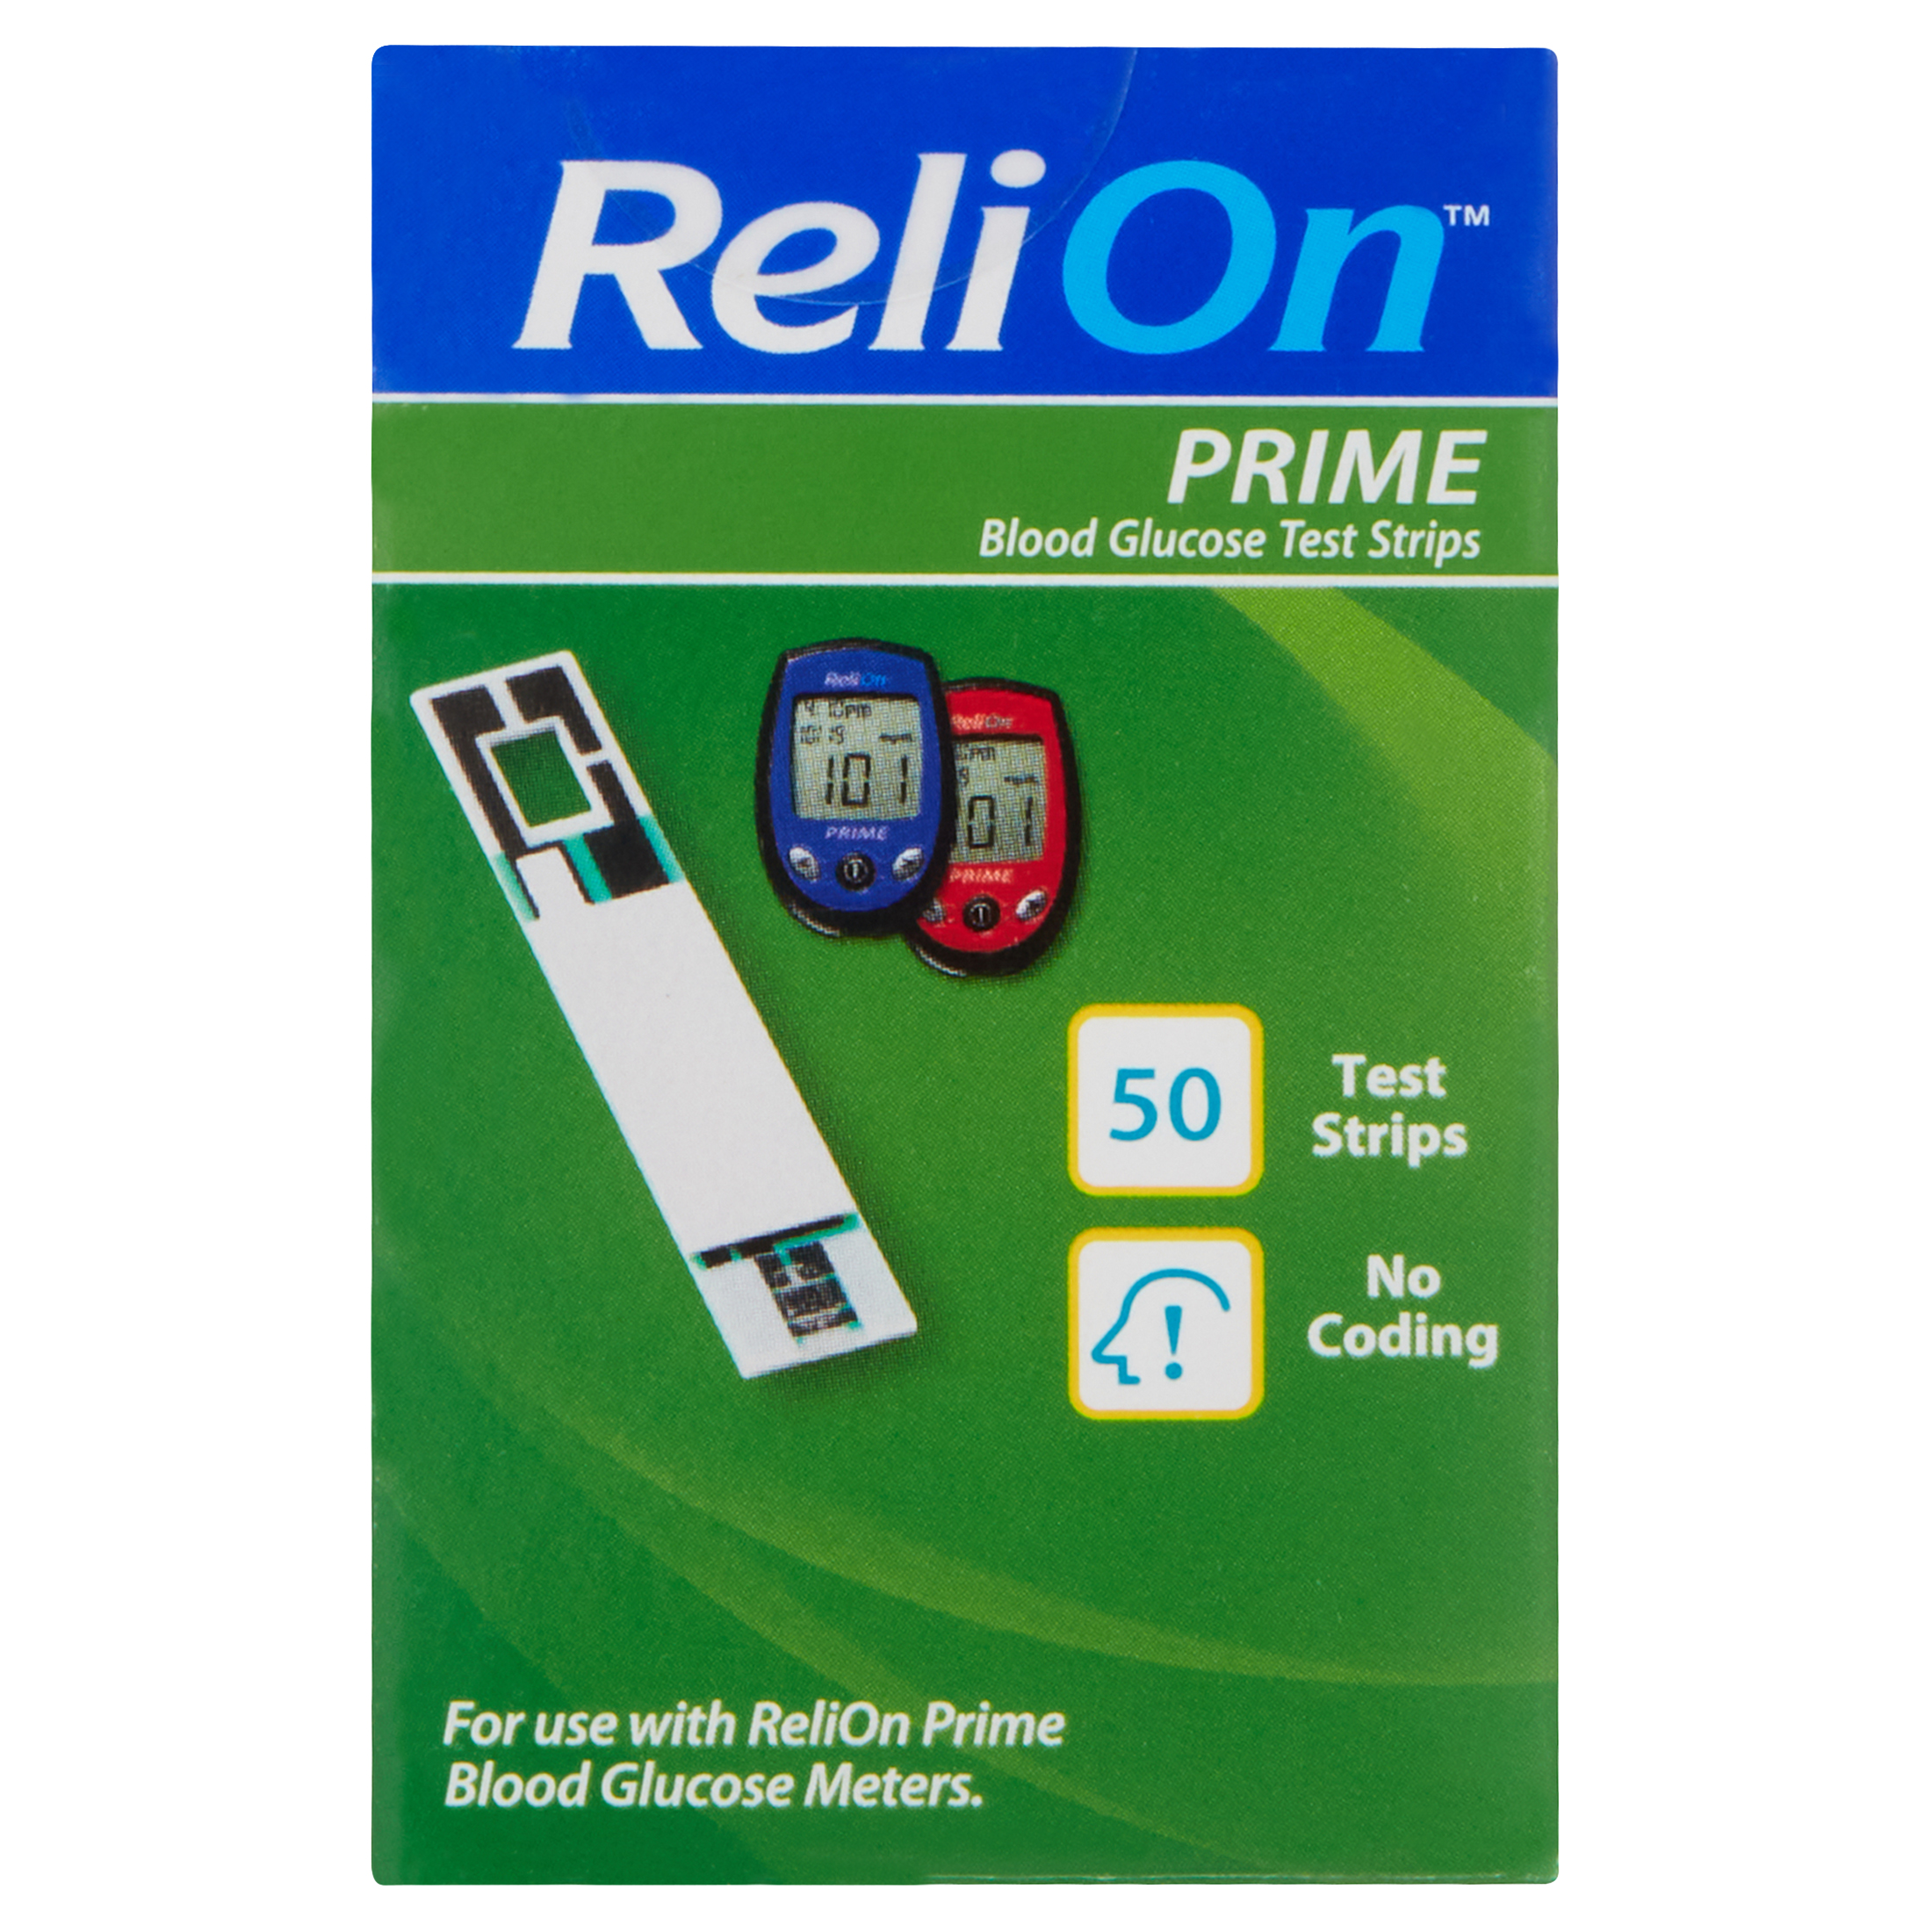 ReliOn Prime Blood Glucose Test Strips, 50 Count - image 1 of 8